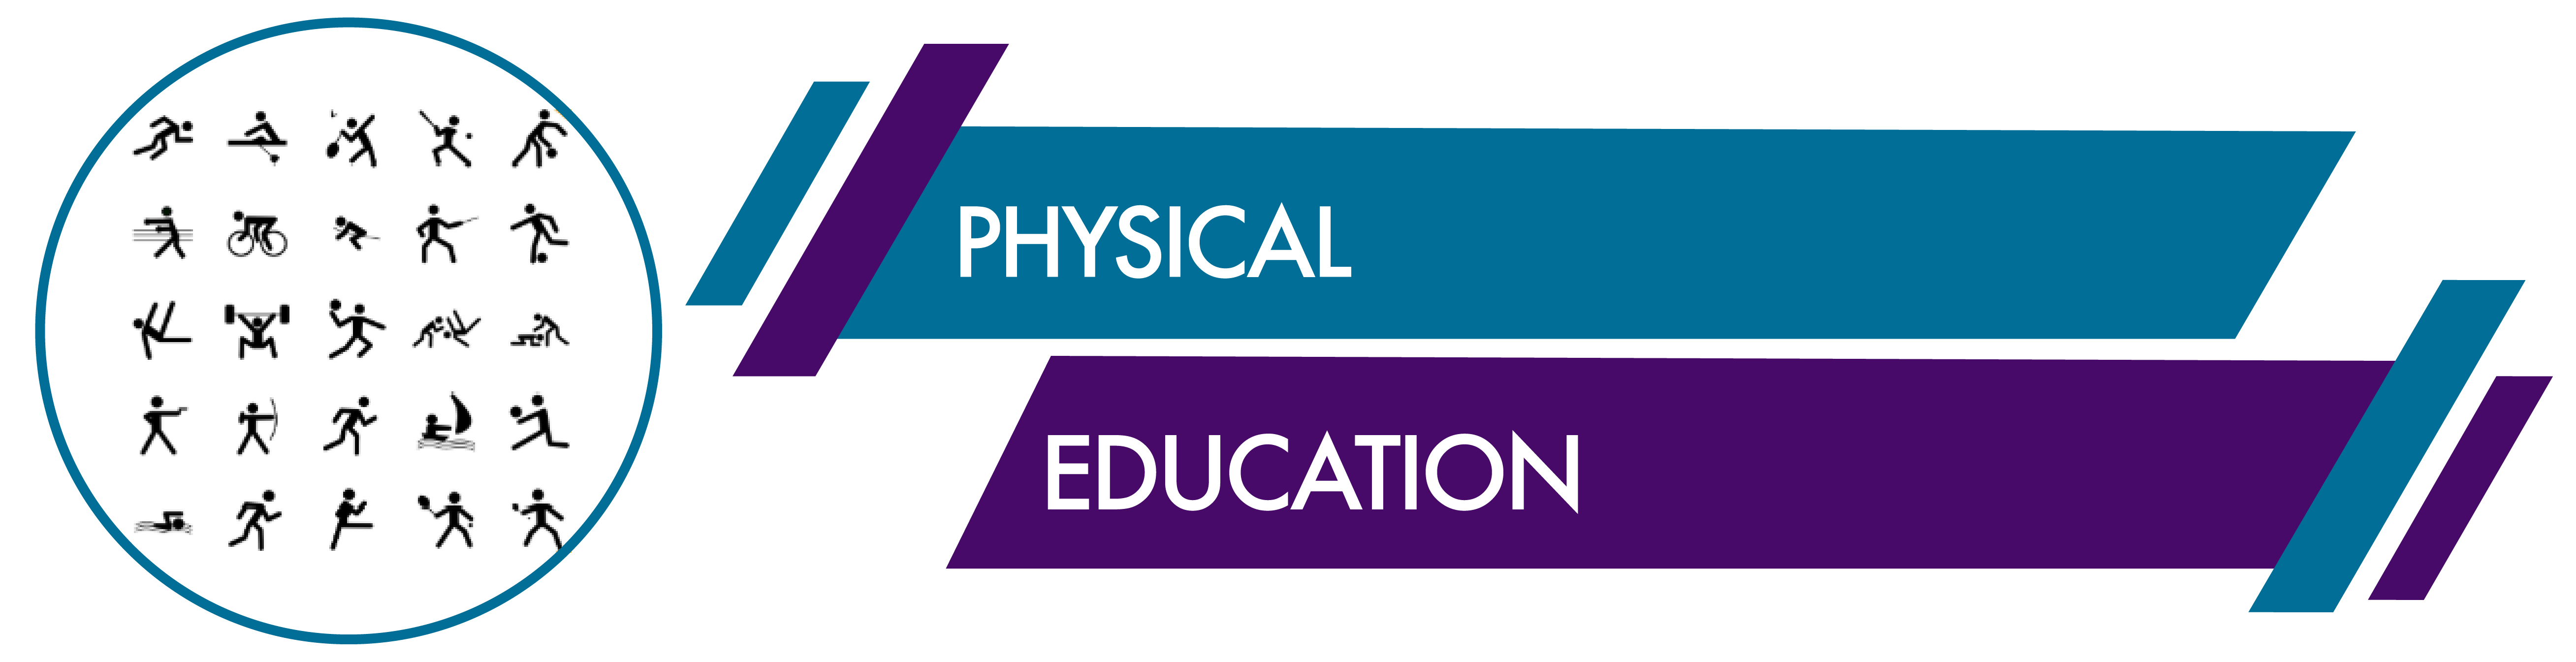 Physical Education (PE) Banner